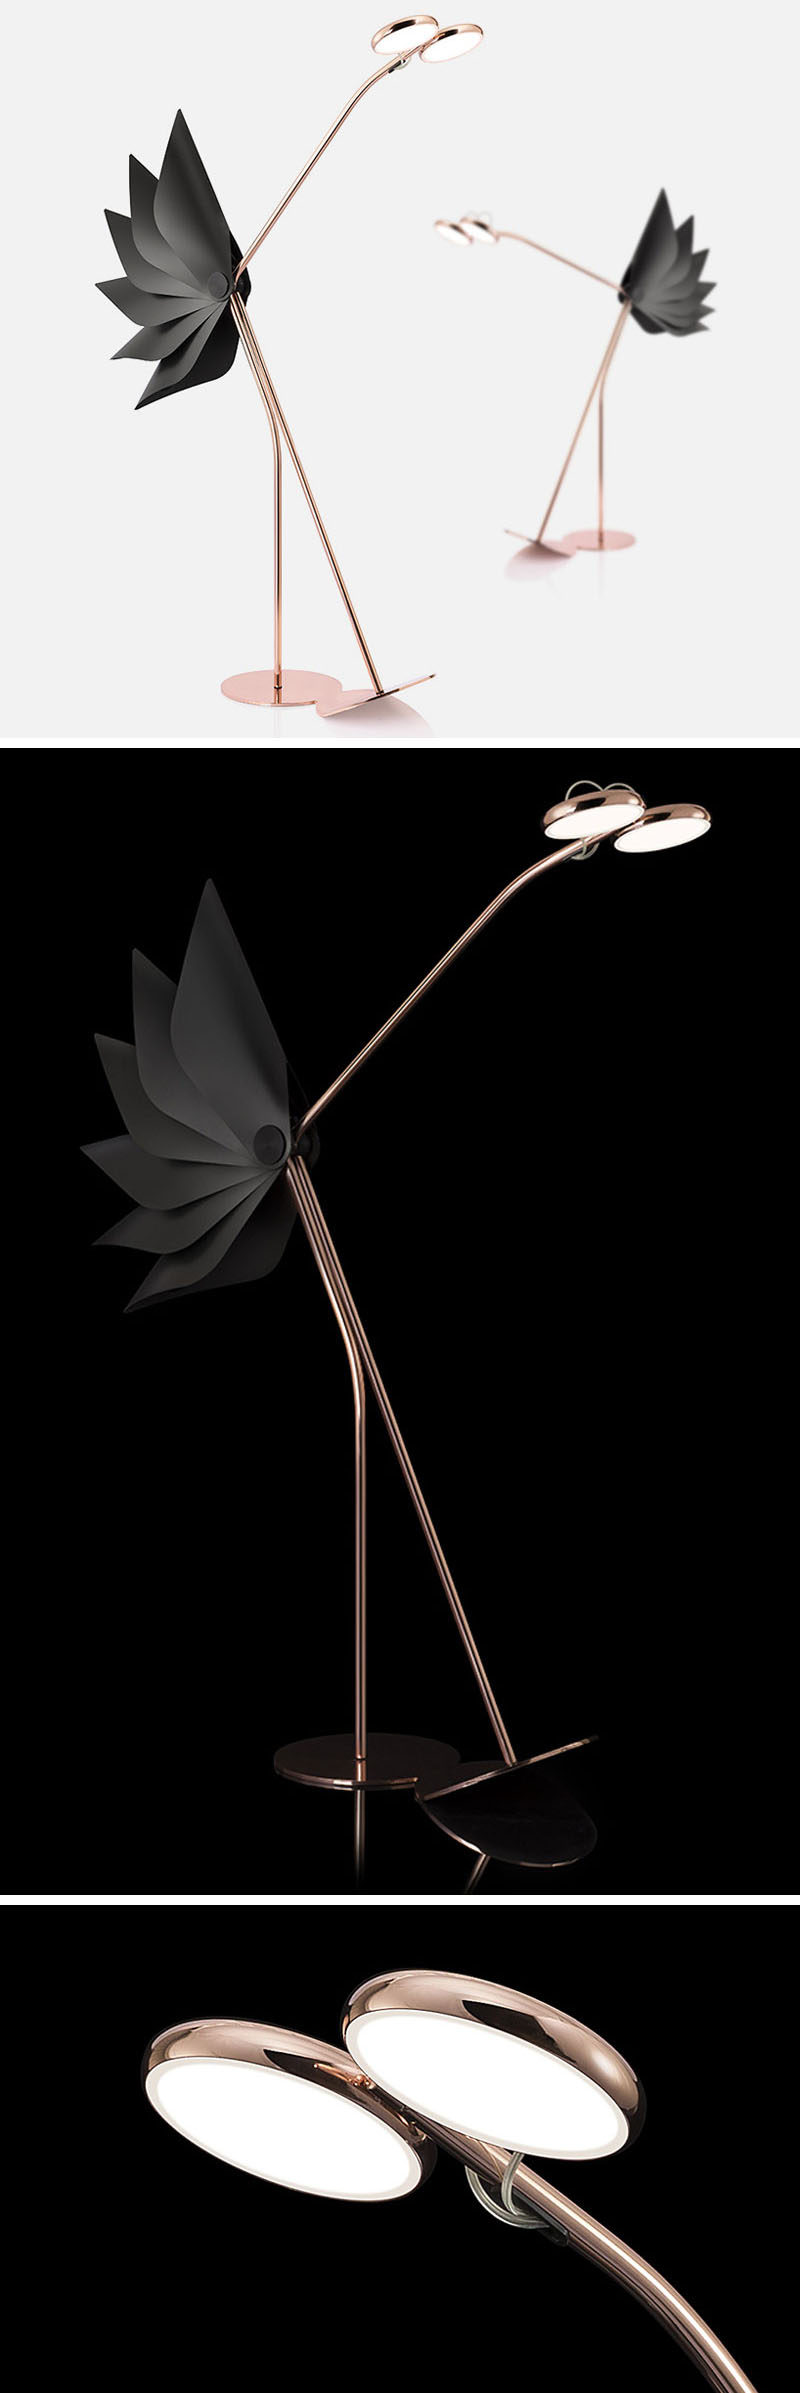 Dorking is a playful floor lamp that has a tail that opens or closes depending on whether or not its eyes are in a lowered or raised position. The lamp is made from copper and aluminum with a articulated tail made from plastic. #FloorLamp #Lighting #Design